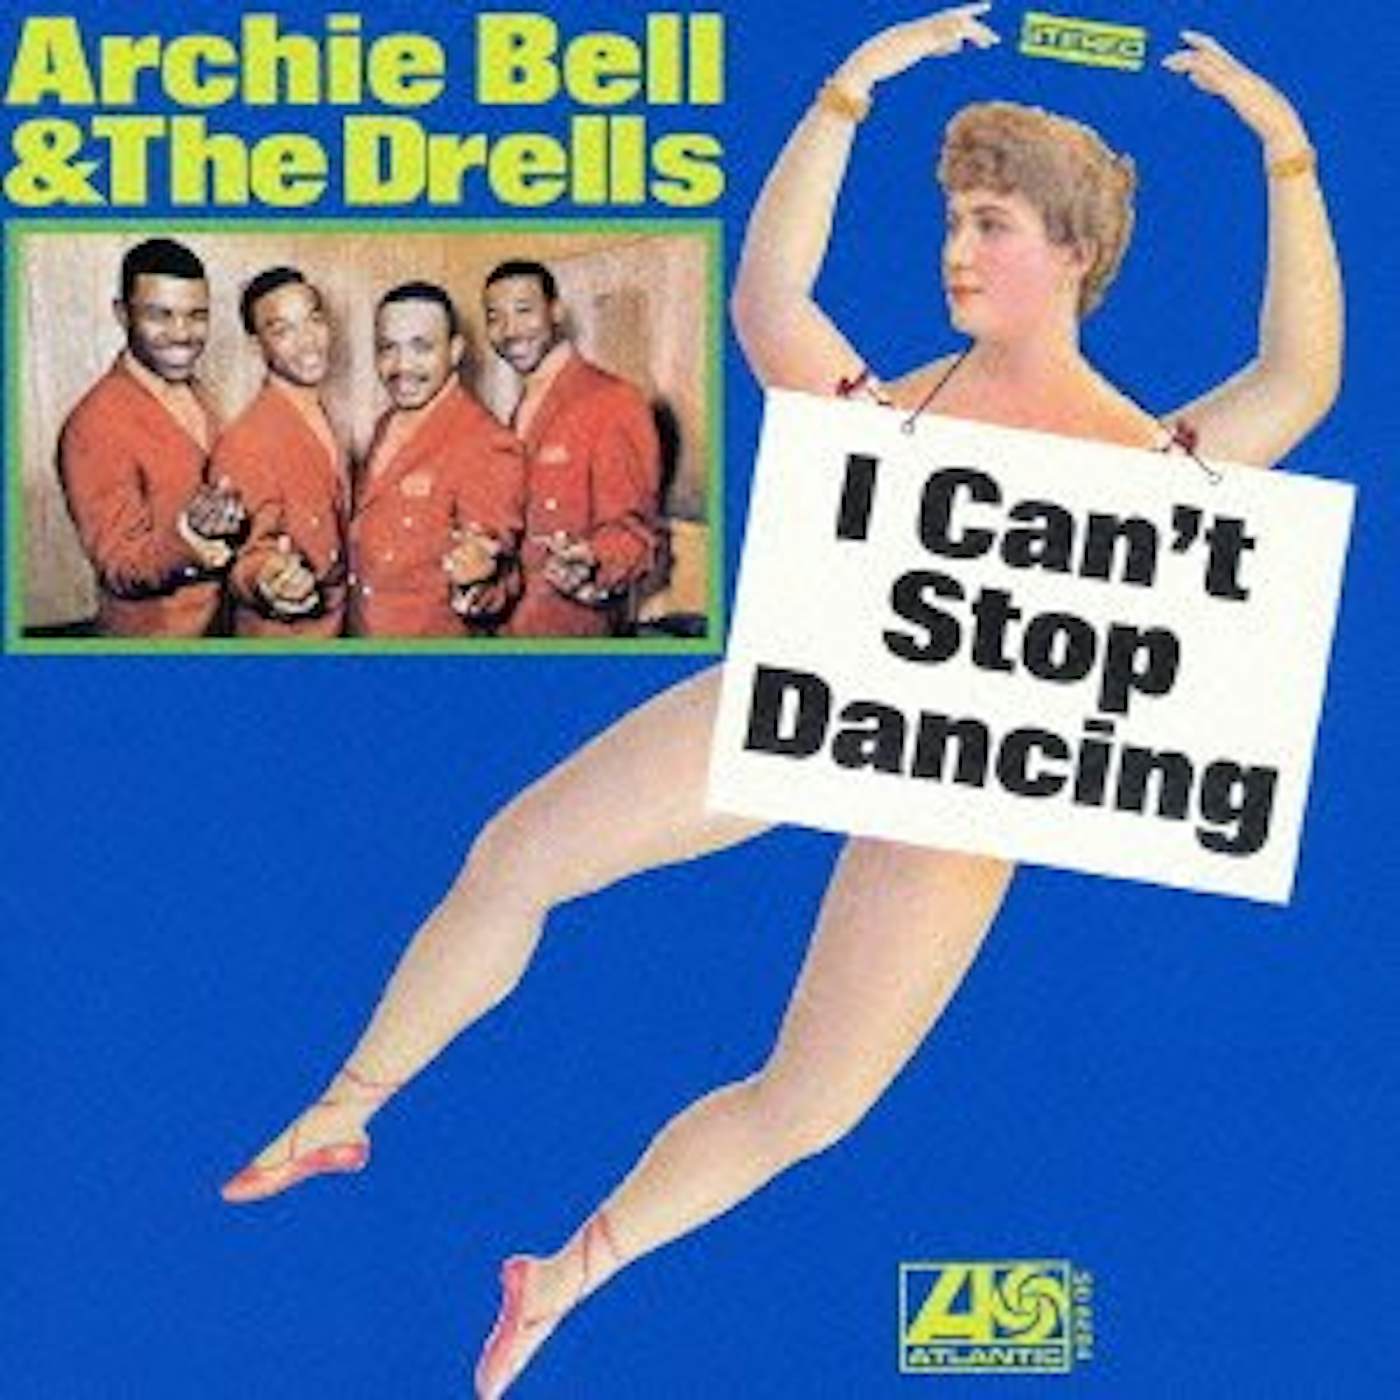 Archie Bell & The Drells I CAN'T STOP DANCING CD